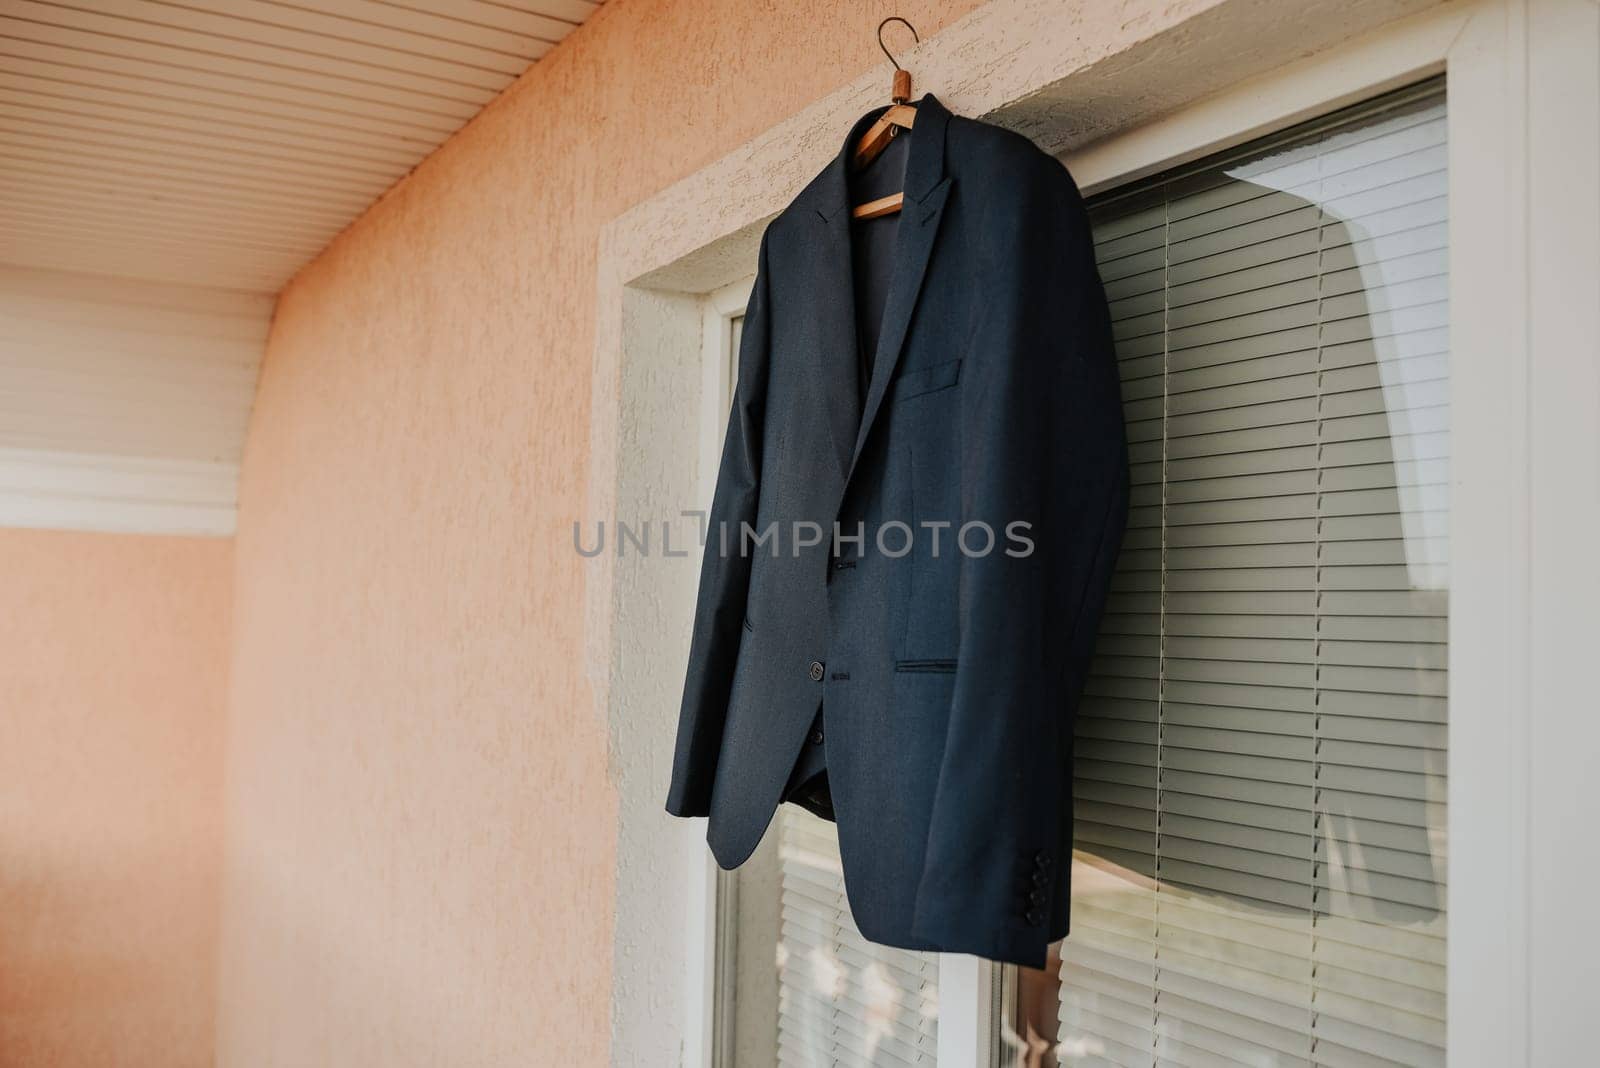 A black jacket hangs against a white window in the room. by AndriiDrachuk